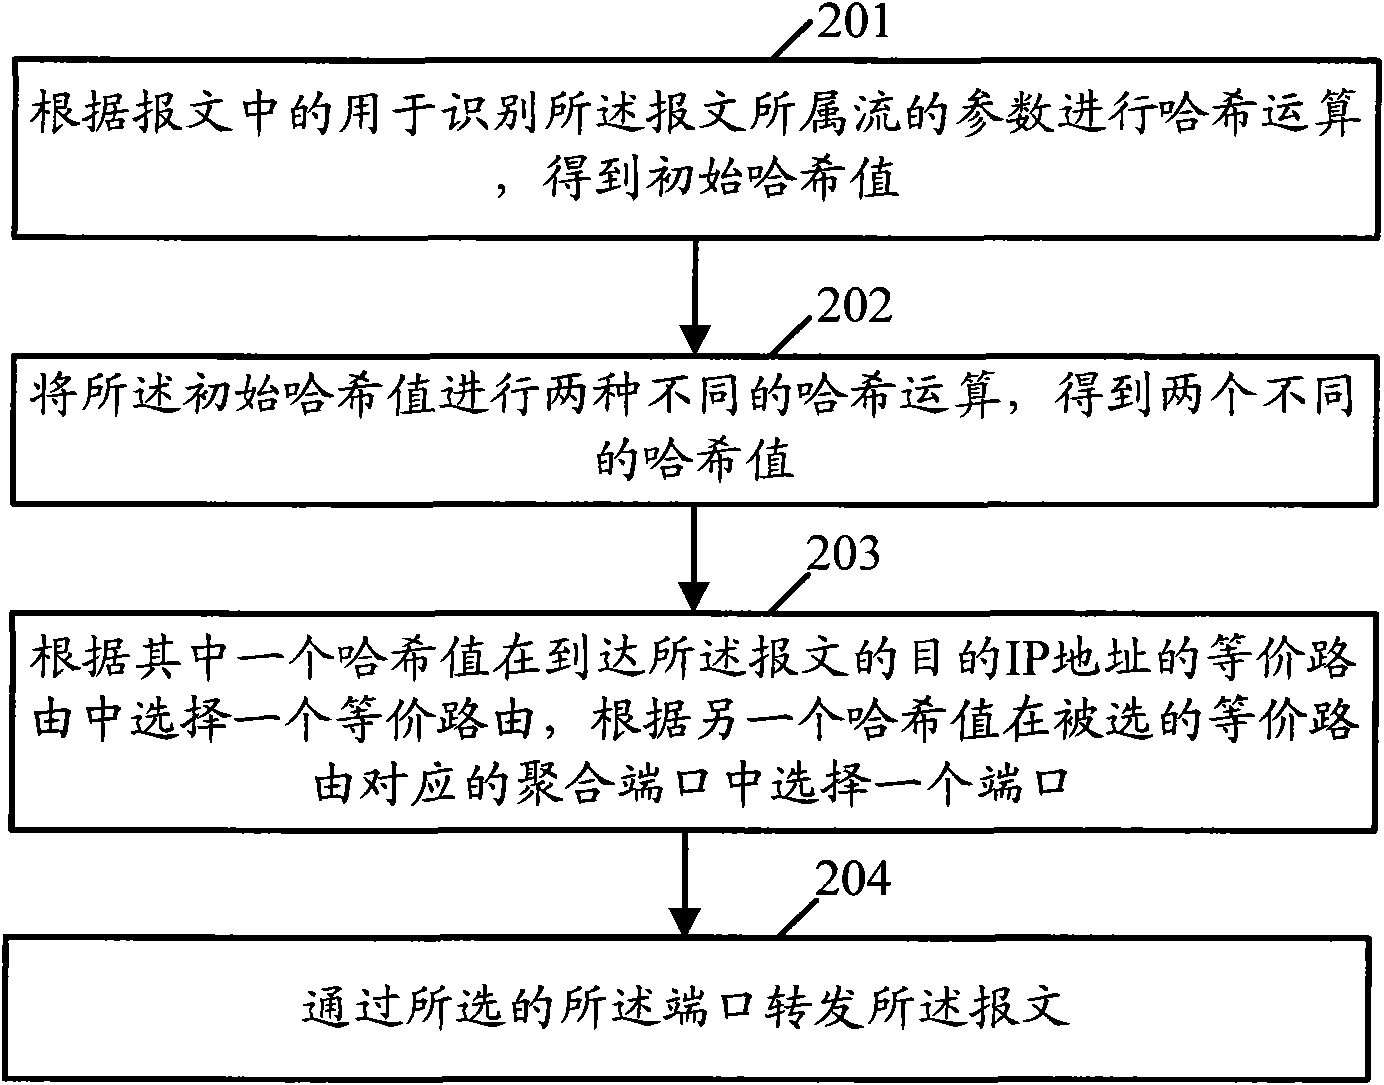 Method and device for forwarding messages